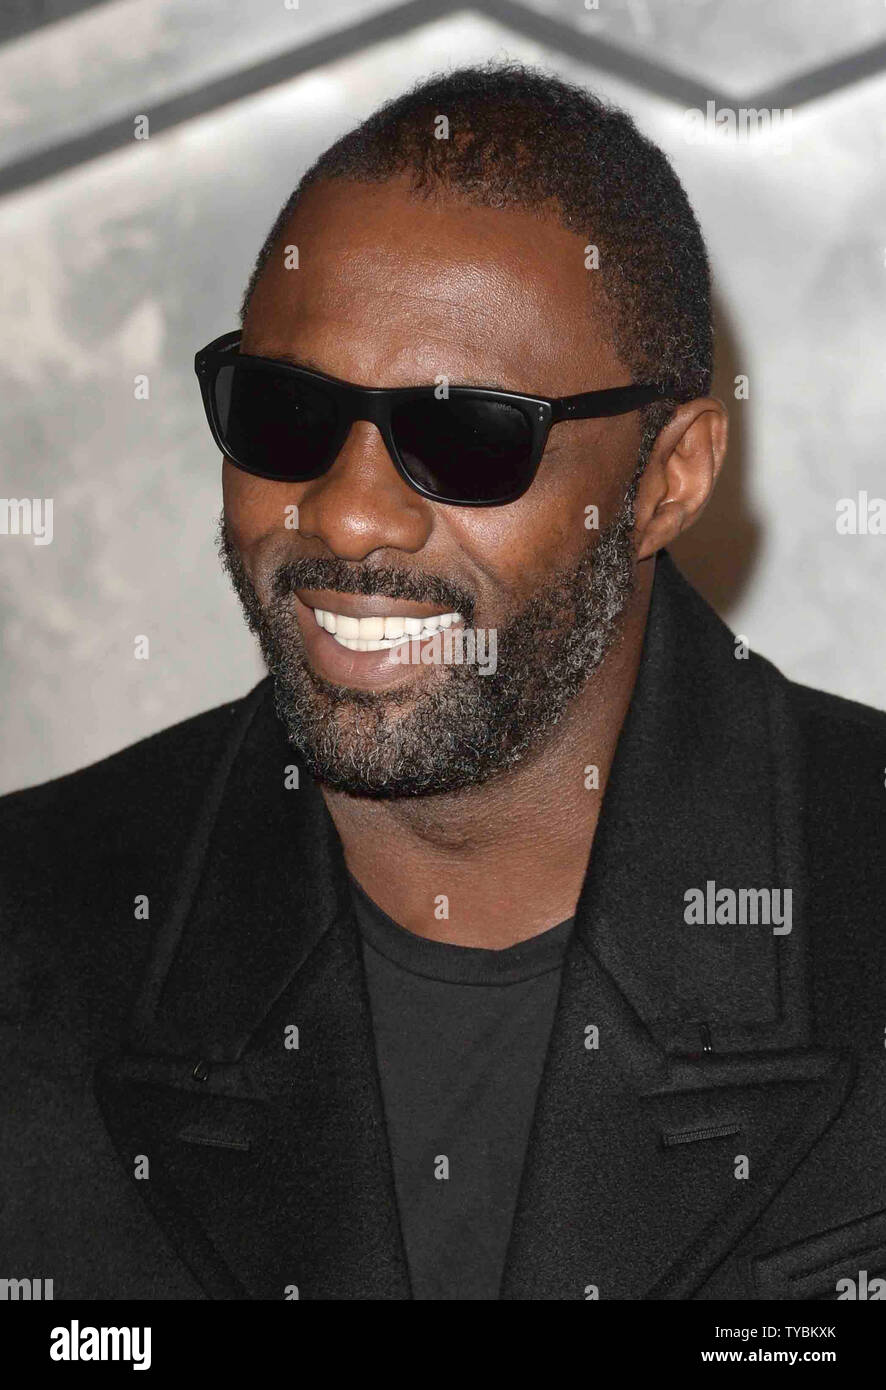 English actor Idris Elba attends the World Premiere of 'Thor: The Dark World' at The Odeon Leicester Square in London on October 22 2013.     UPI/Paul Treadway Stock Photo